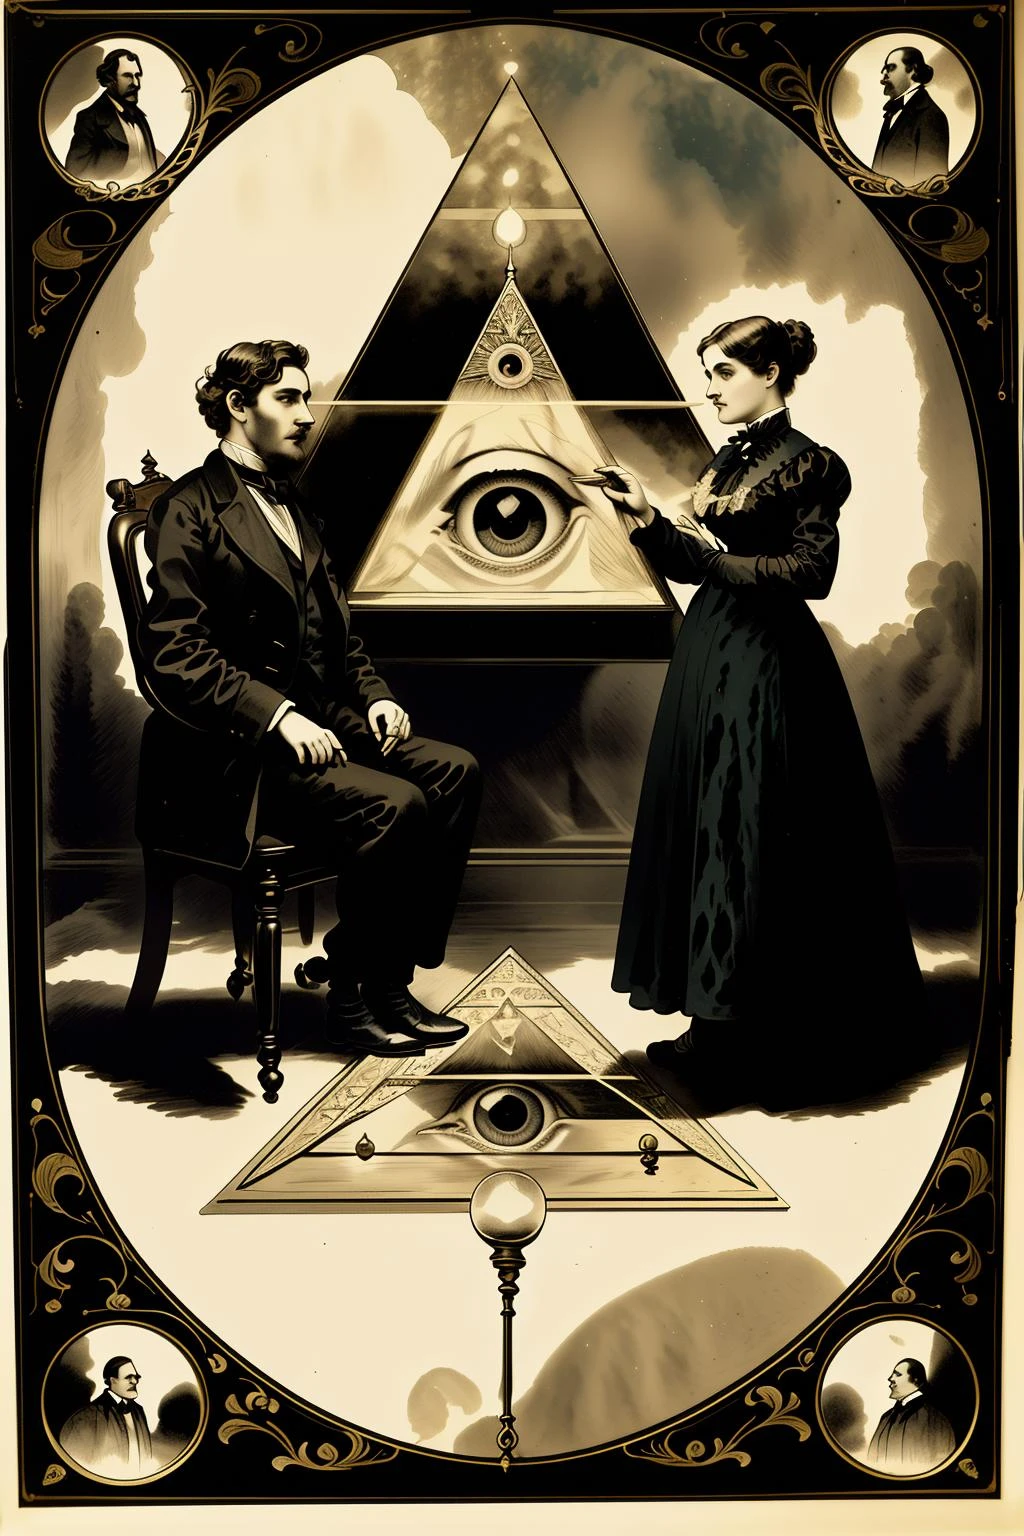 a viktorianisch  poster advertising a  a painting of two people sitting on a rug in front of a pyramid with an eye in the center of the image and a third person standing on the floor , 1800, Charles McAuley, set in 1860, ein Siebdruck, amerikanische Barbizon-Schule,  viktorianisch_esoteric , (( viktorianisch style graphic ))